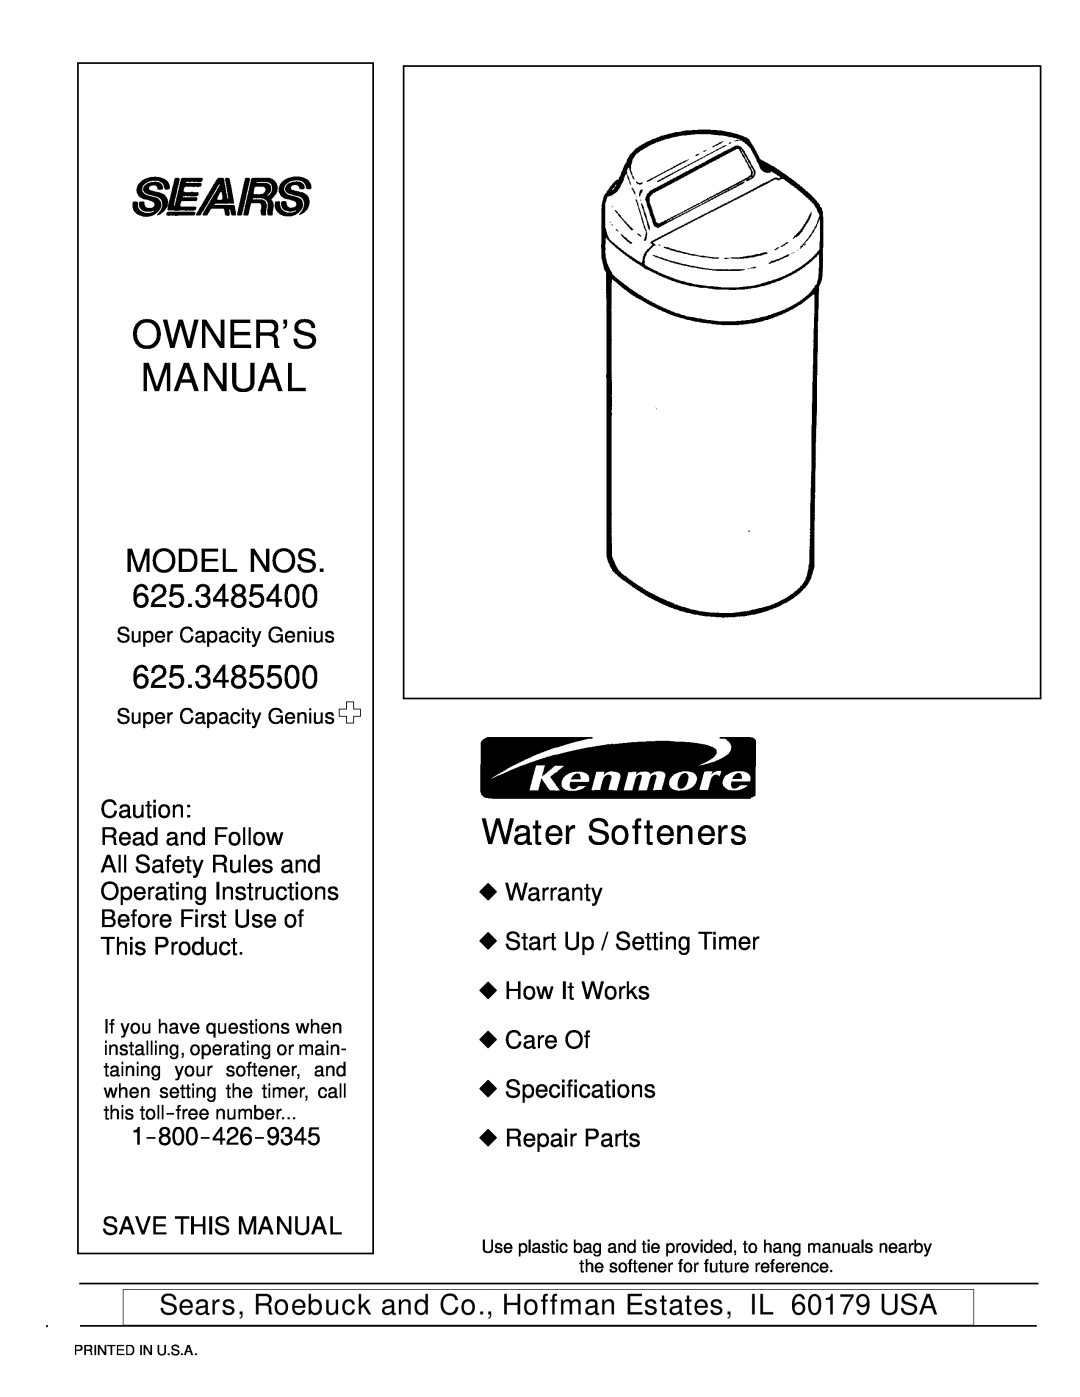 Kenmore 625.3485500 owner manual Water Softeners, Model Nos, Sears, Roebuck and Co., Hoffman Estates, IL 60179 USA 